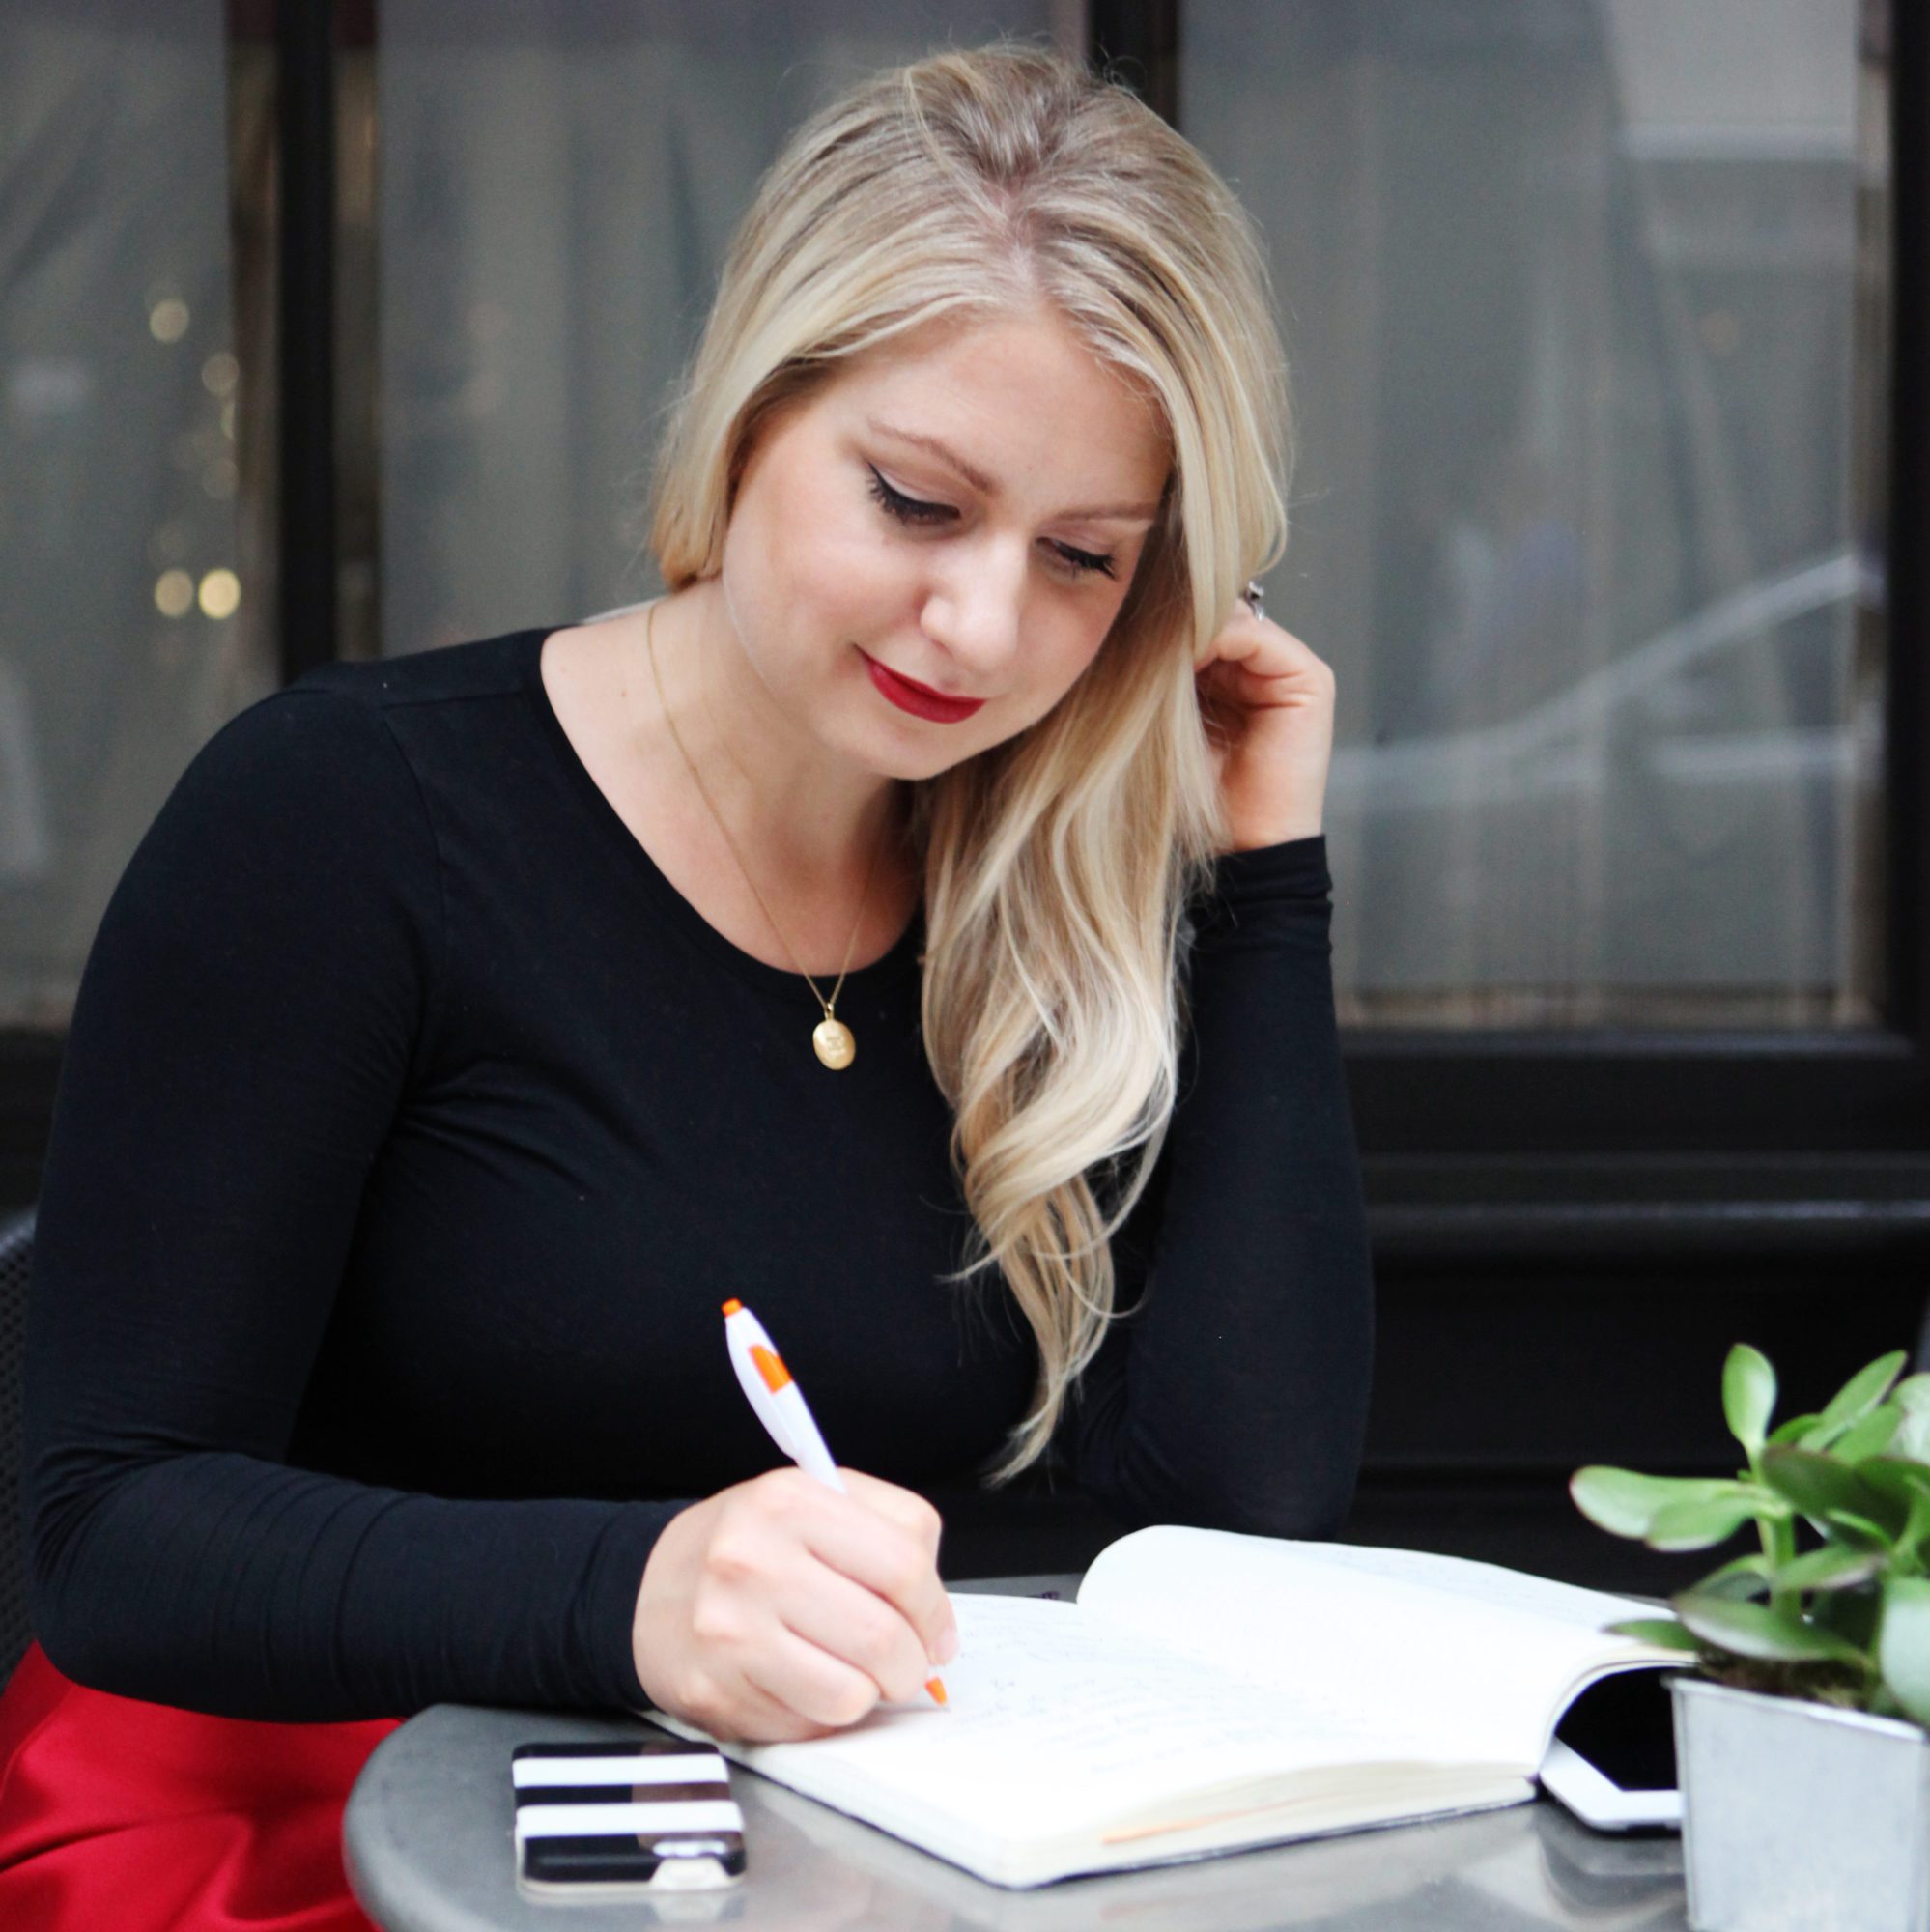 Emily Williams Writing in a Notebook Wearing a Black Sweater